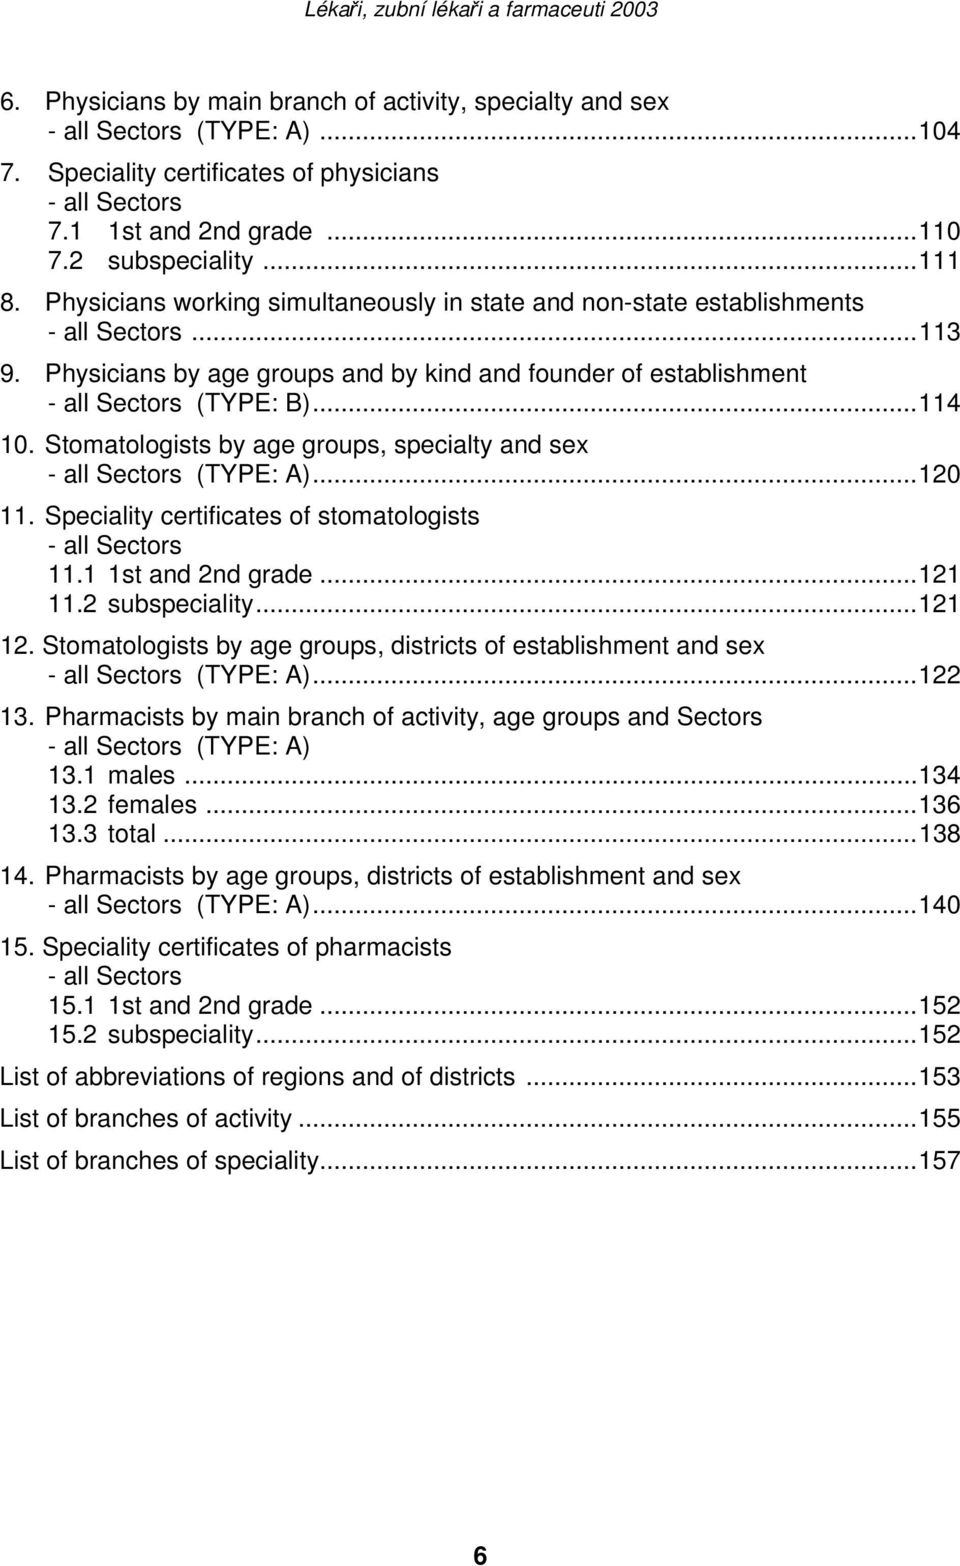 Stomatologists by age groups, specialty and sex - all Sectors (TYPE: A)...120 11. Speciality certificates of stomatologists - all Sectors 11.1 1st and 2nd grade...121 11.2 subspeciality...121 12.